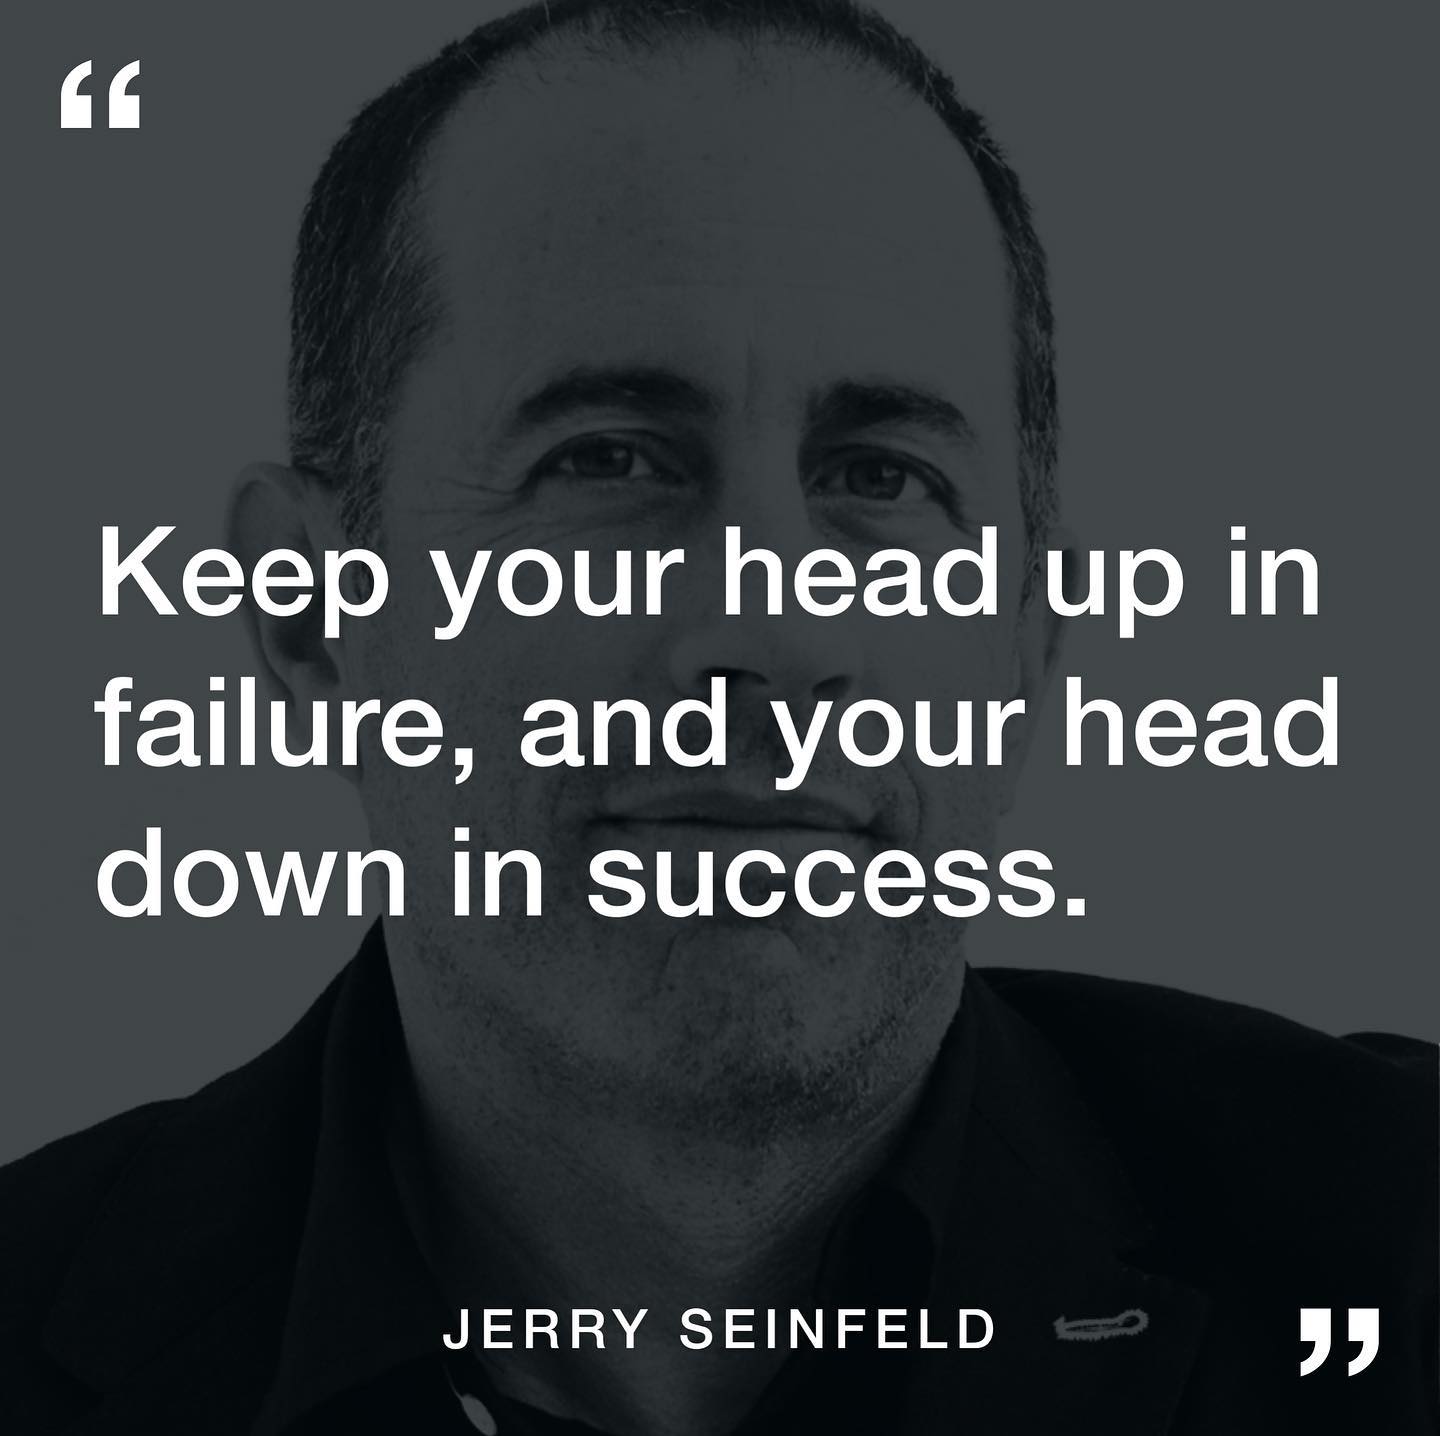 Keep your head up in failure, and your head down in success